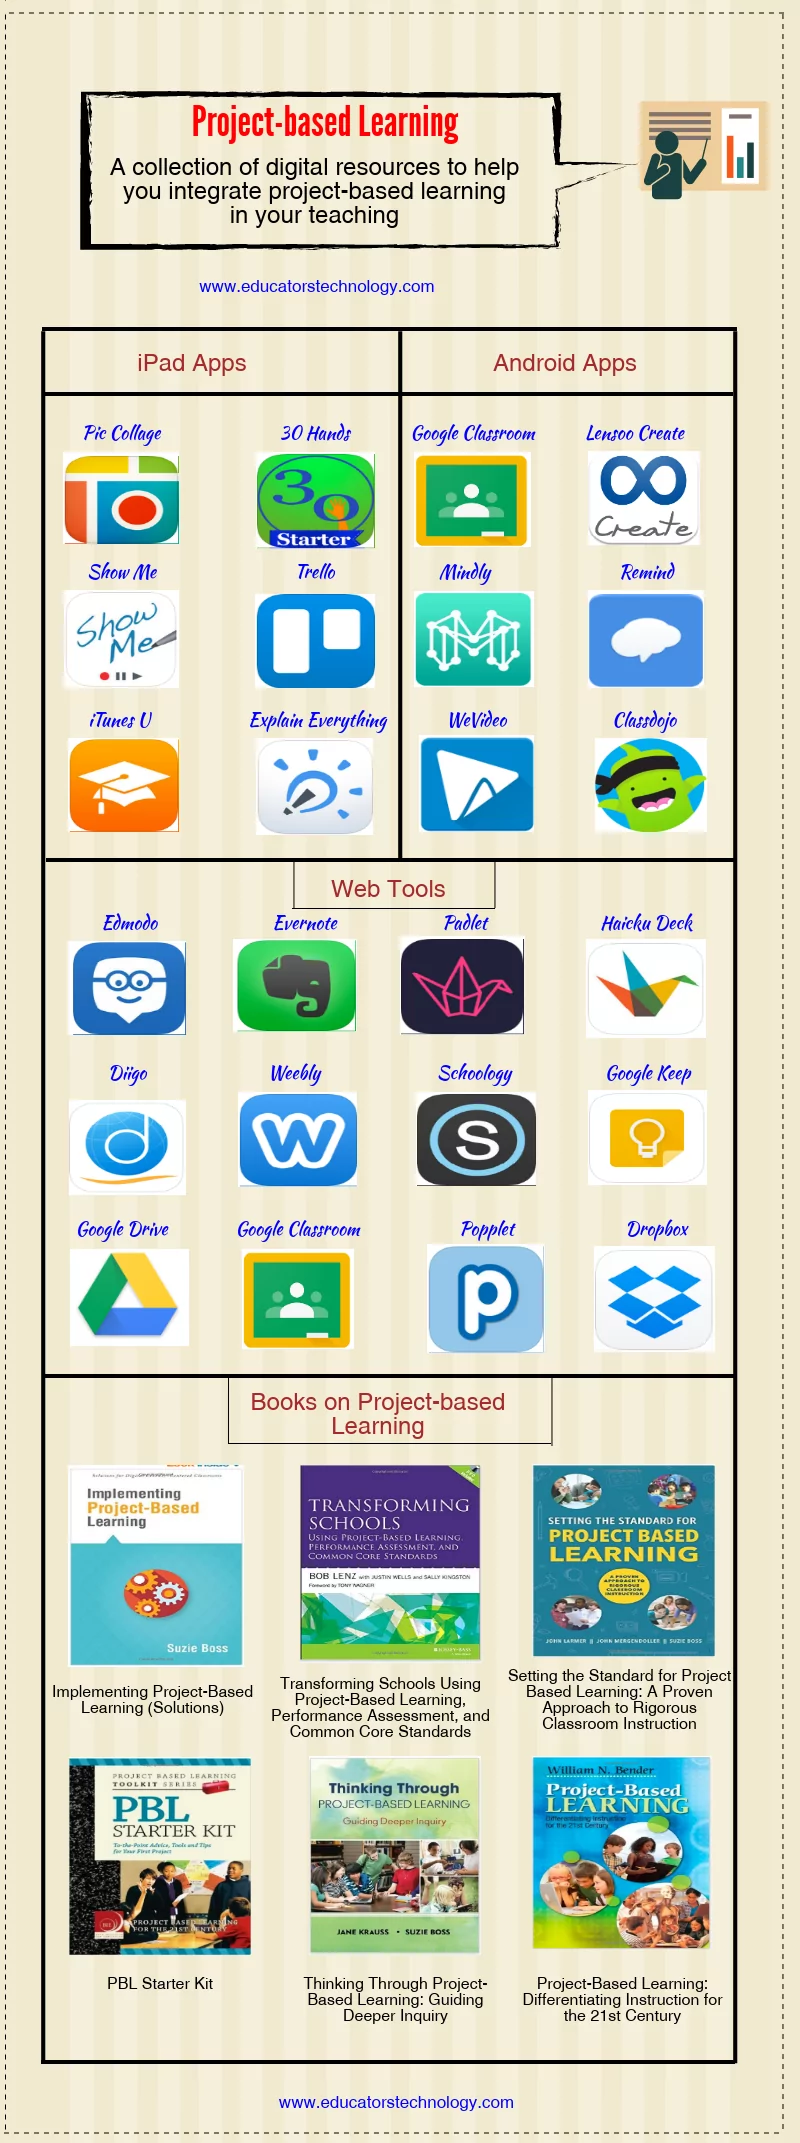 Some Helpful Project-based Learning Resources and Apps for Teachers